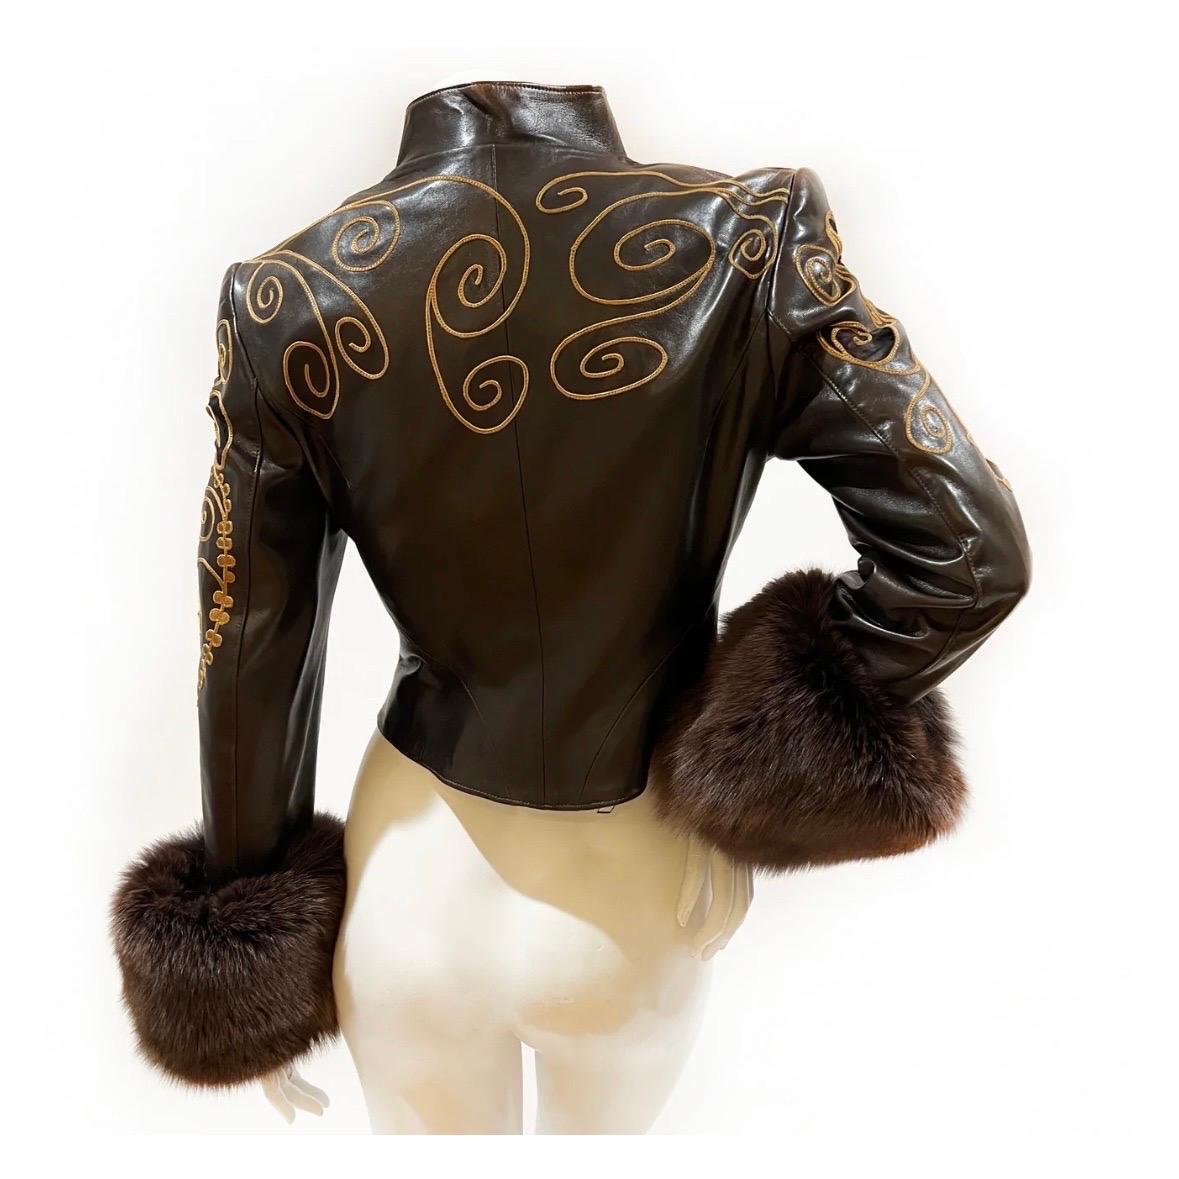 Vintage embellished jacket by Jean Claude Jitrois
Circa 1980s 
Brown leather
Fox fur cuffs
Decorative, whimsical, gold colored embroidery 
Angular collar
Small mesh cutouts throughout 
Button-front closure
Textured gold-metal buttons
Shoulder